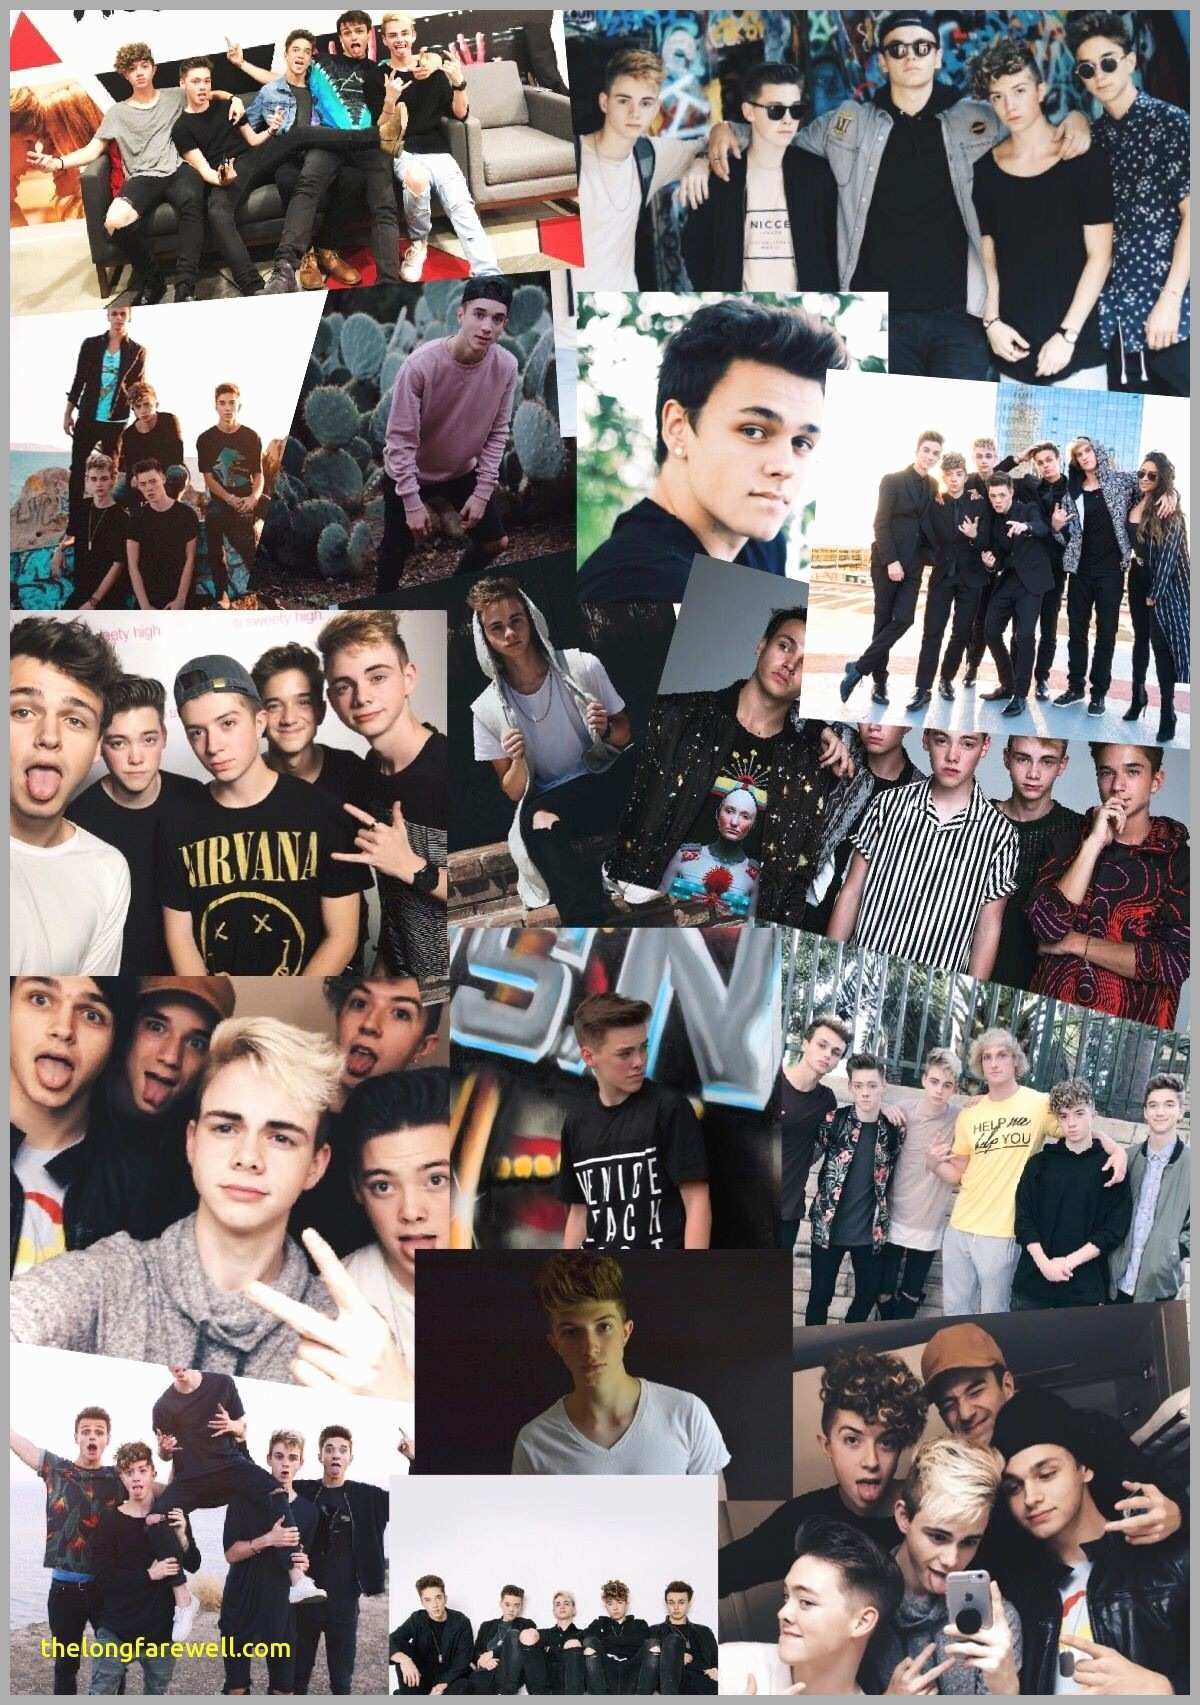 Why Dont We Wallpaper